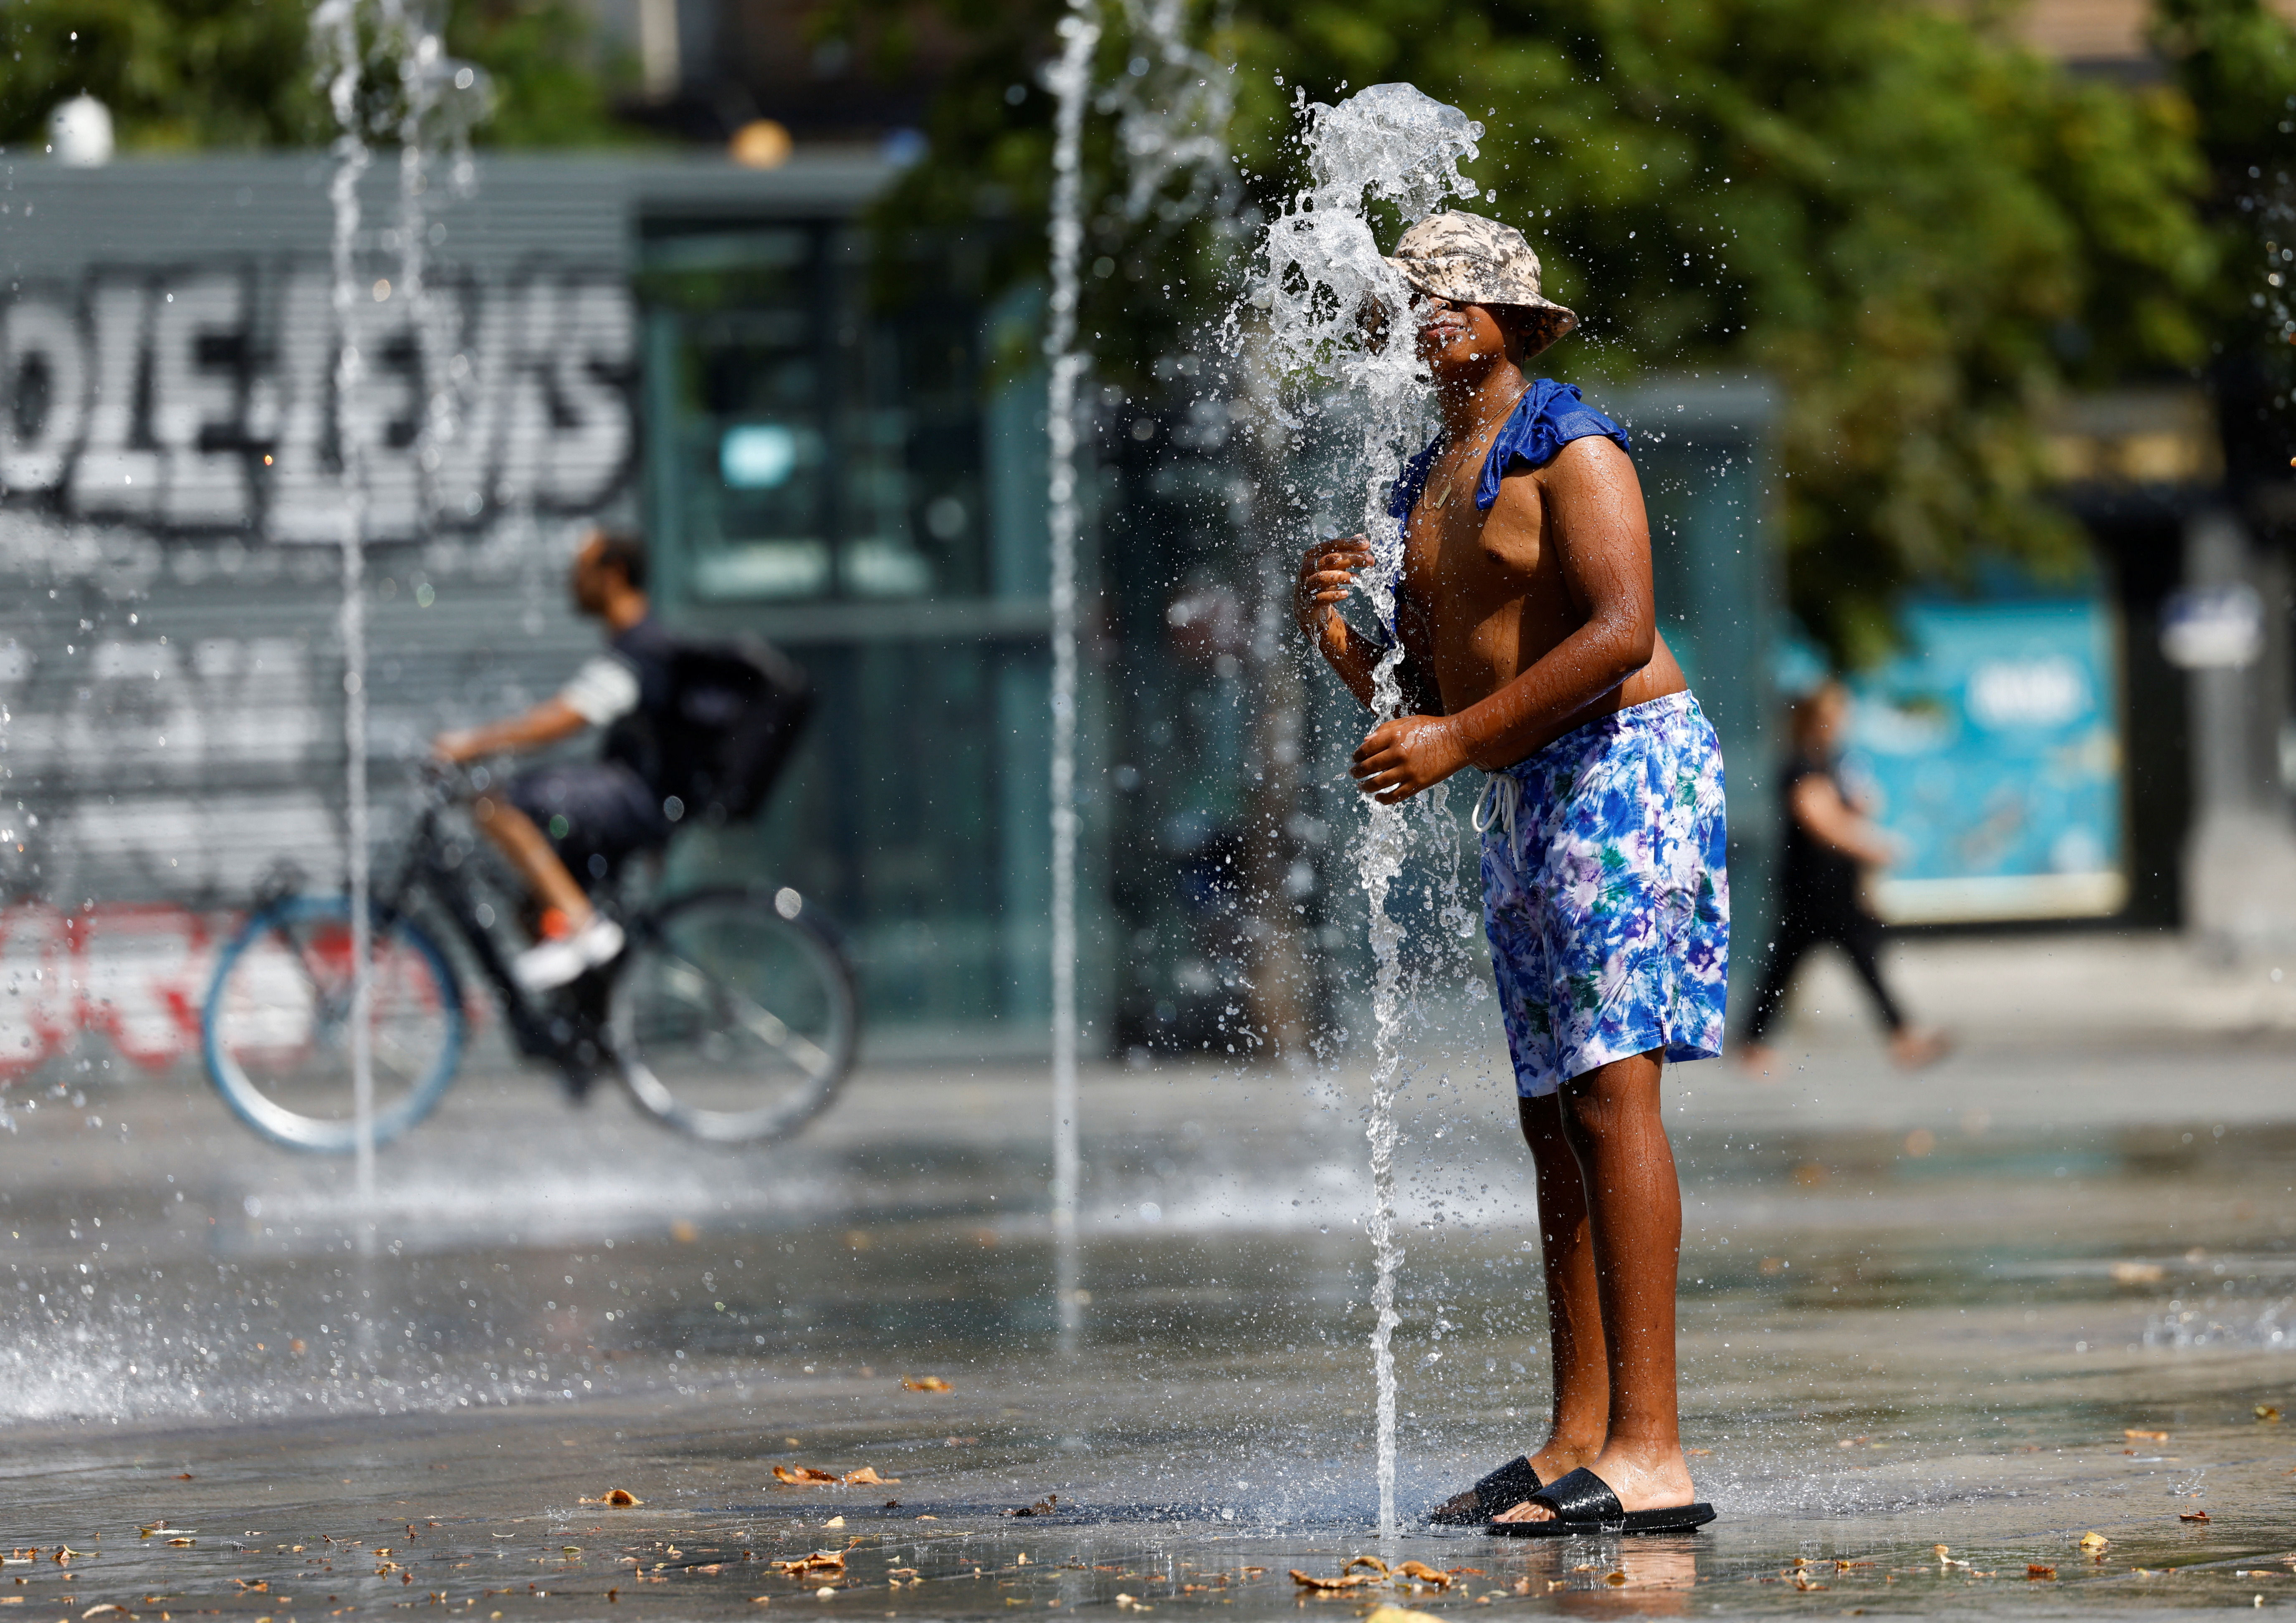 A man searches for water in Brussels, as the temperature rises (REUTERS/Yves Herman)